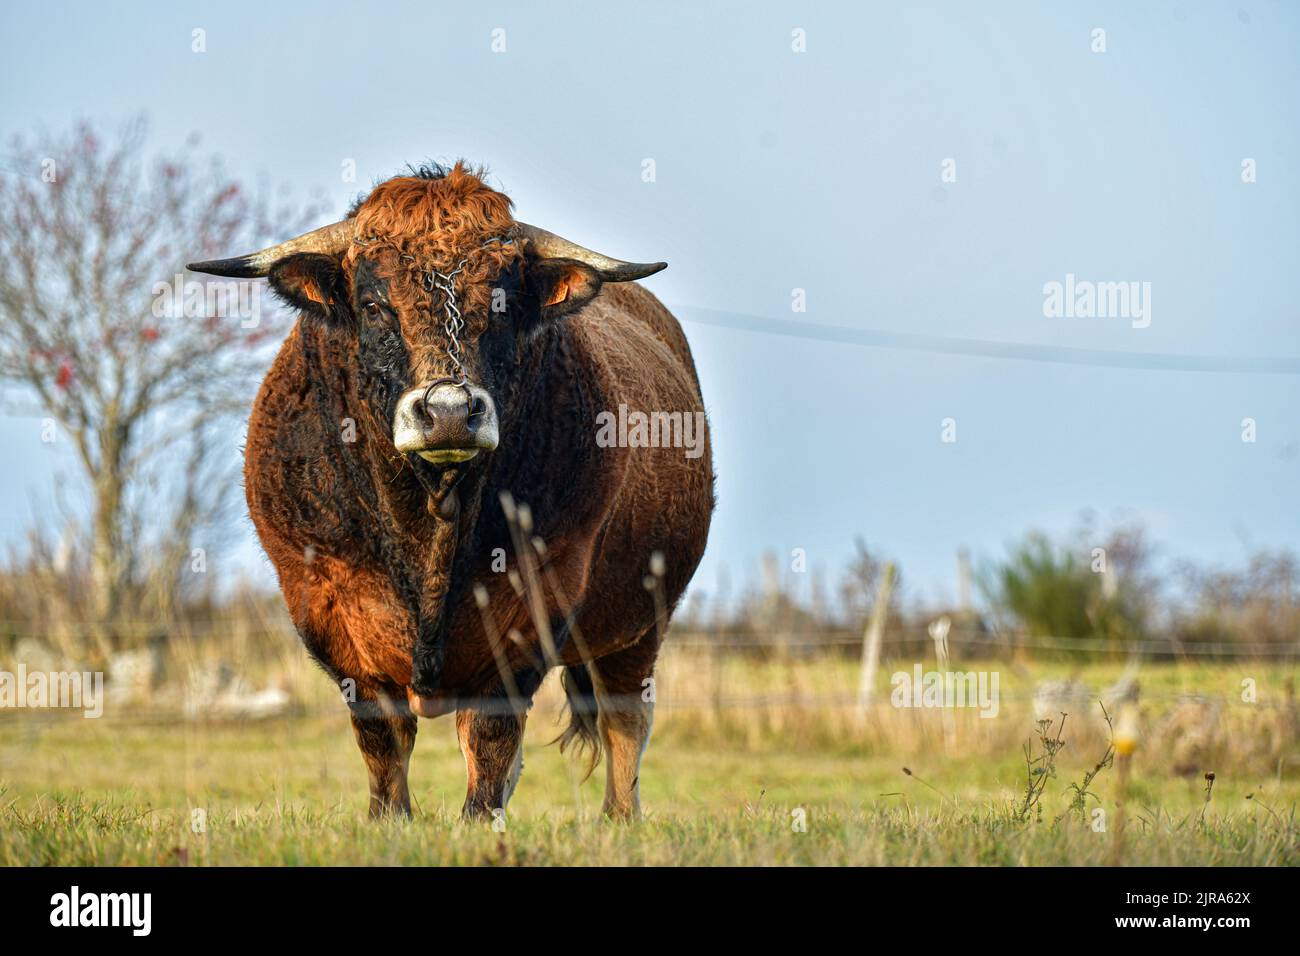 Chanaleilles (south of France): Aubrac bull with a ring in a field. Portrait Stock Photo